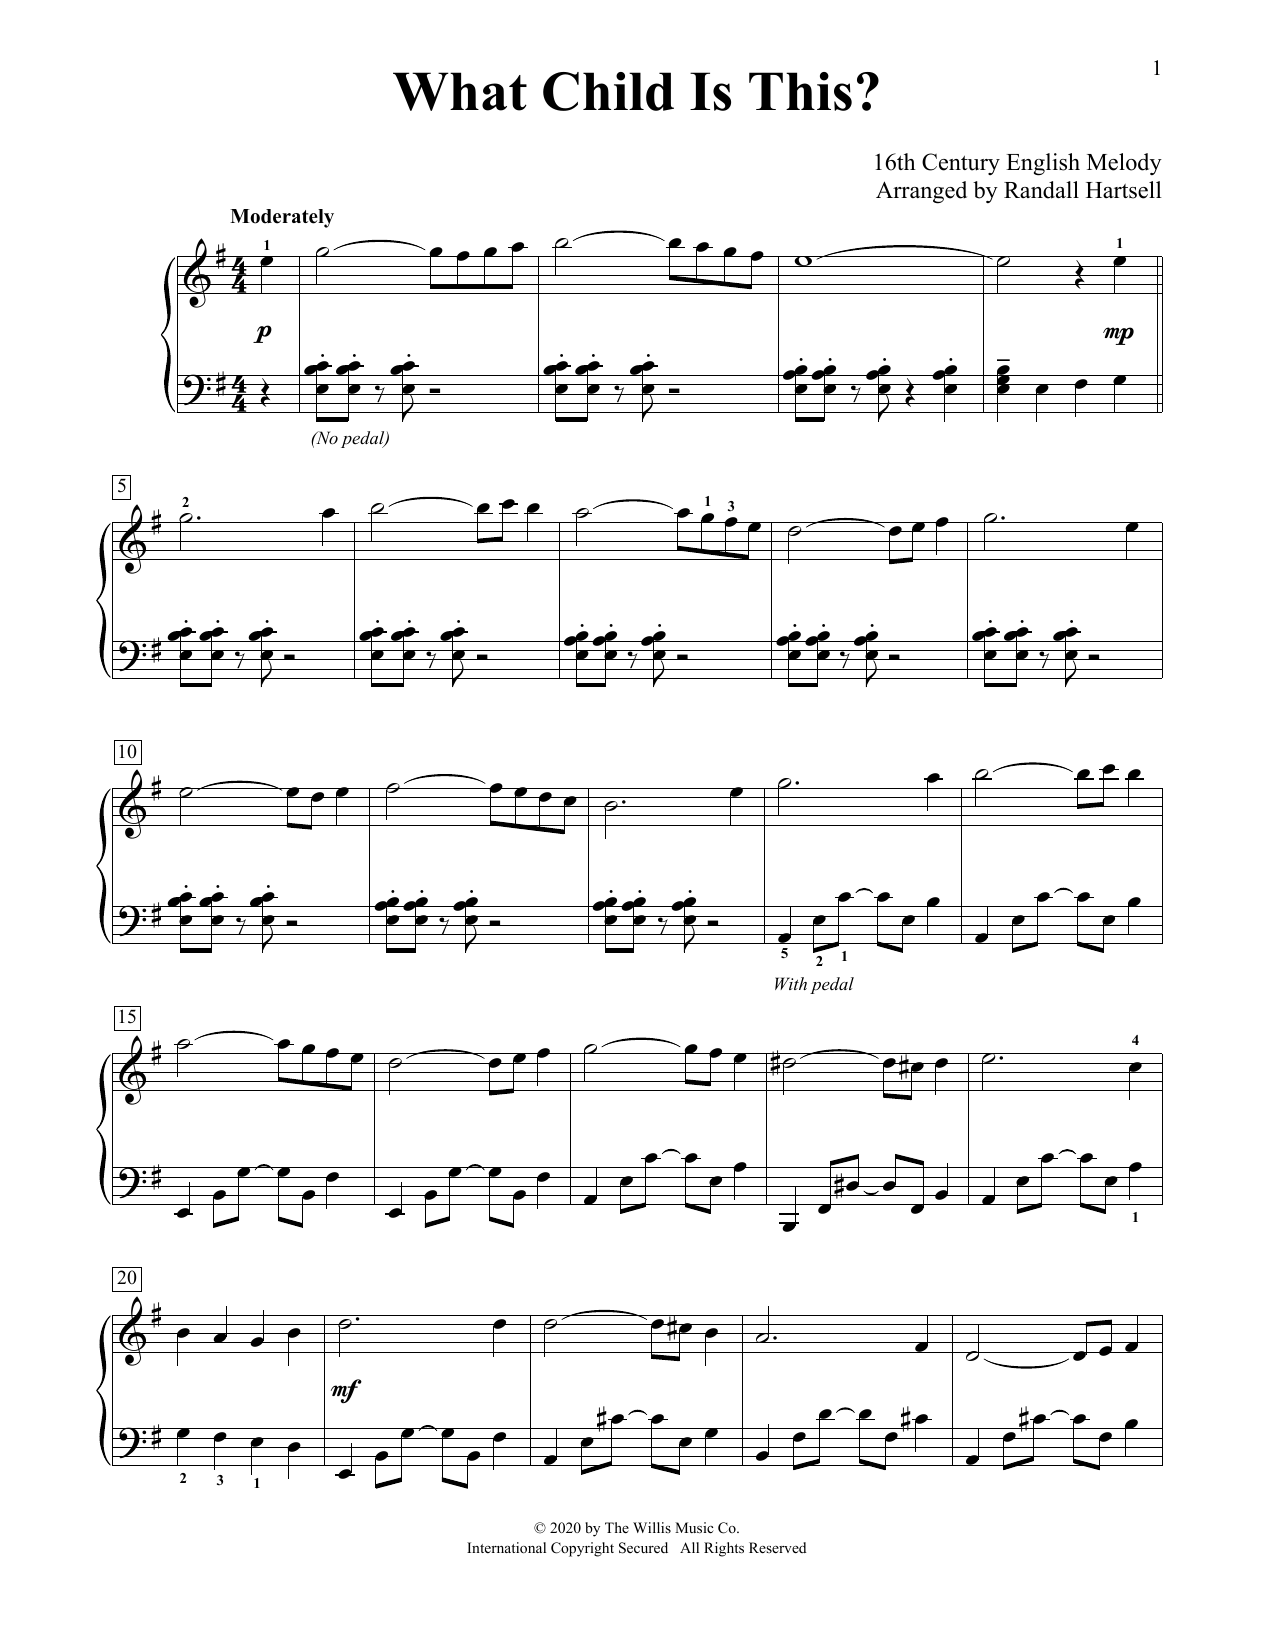 16th Century English Melody What Child Is This? (arr. Randall Hartsell) sheet music notes printable PDF score